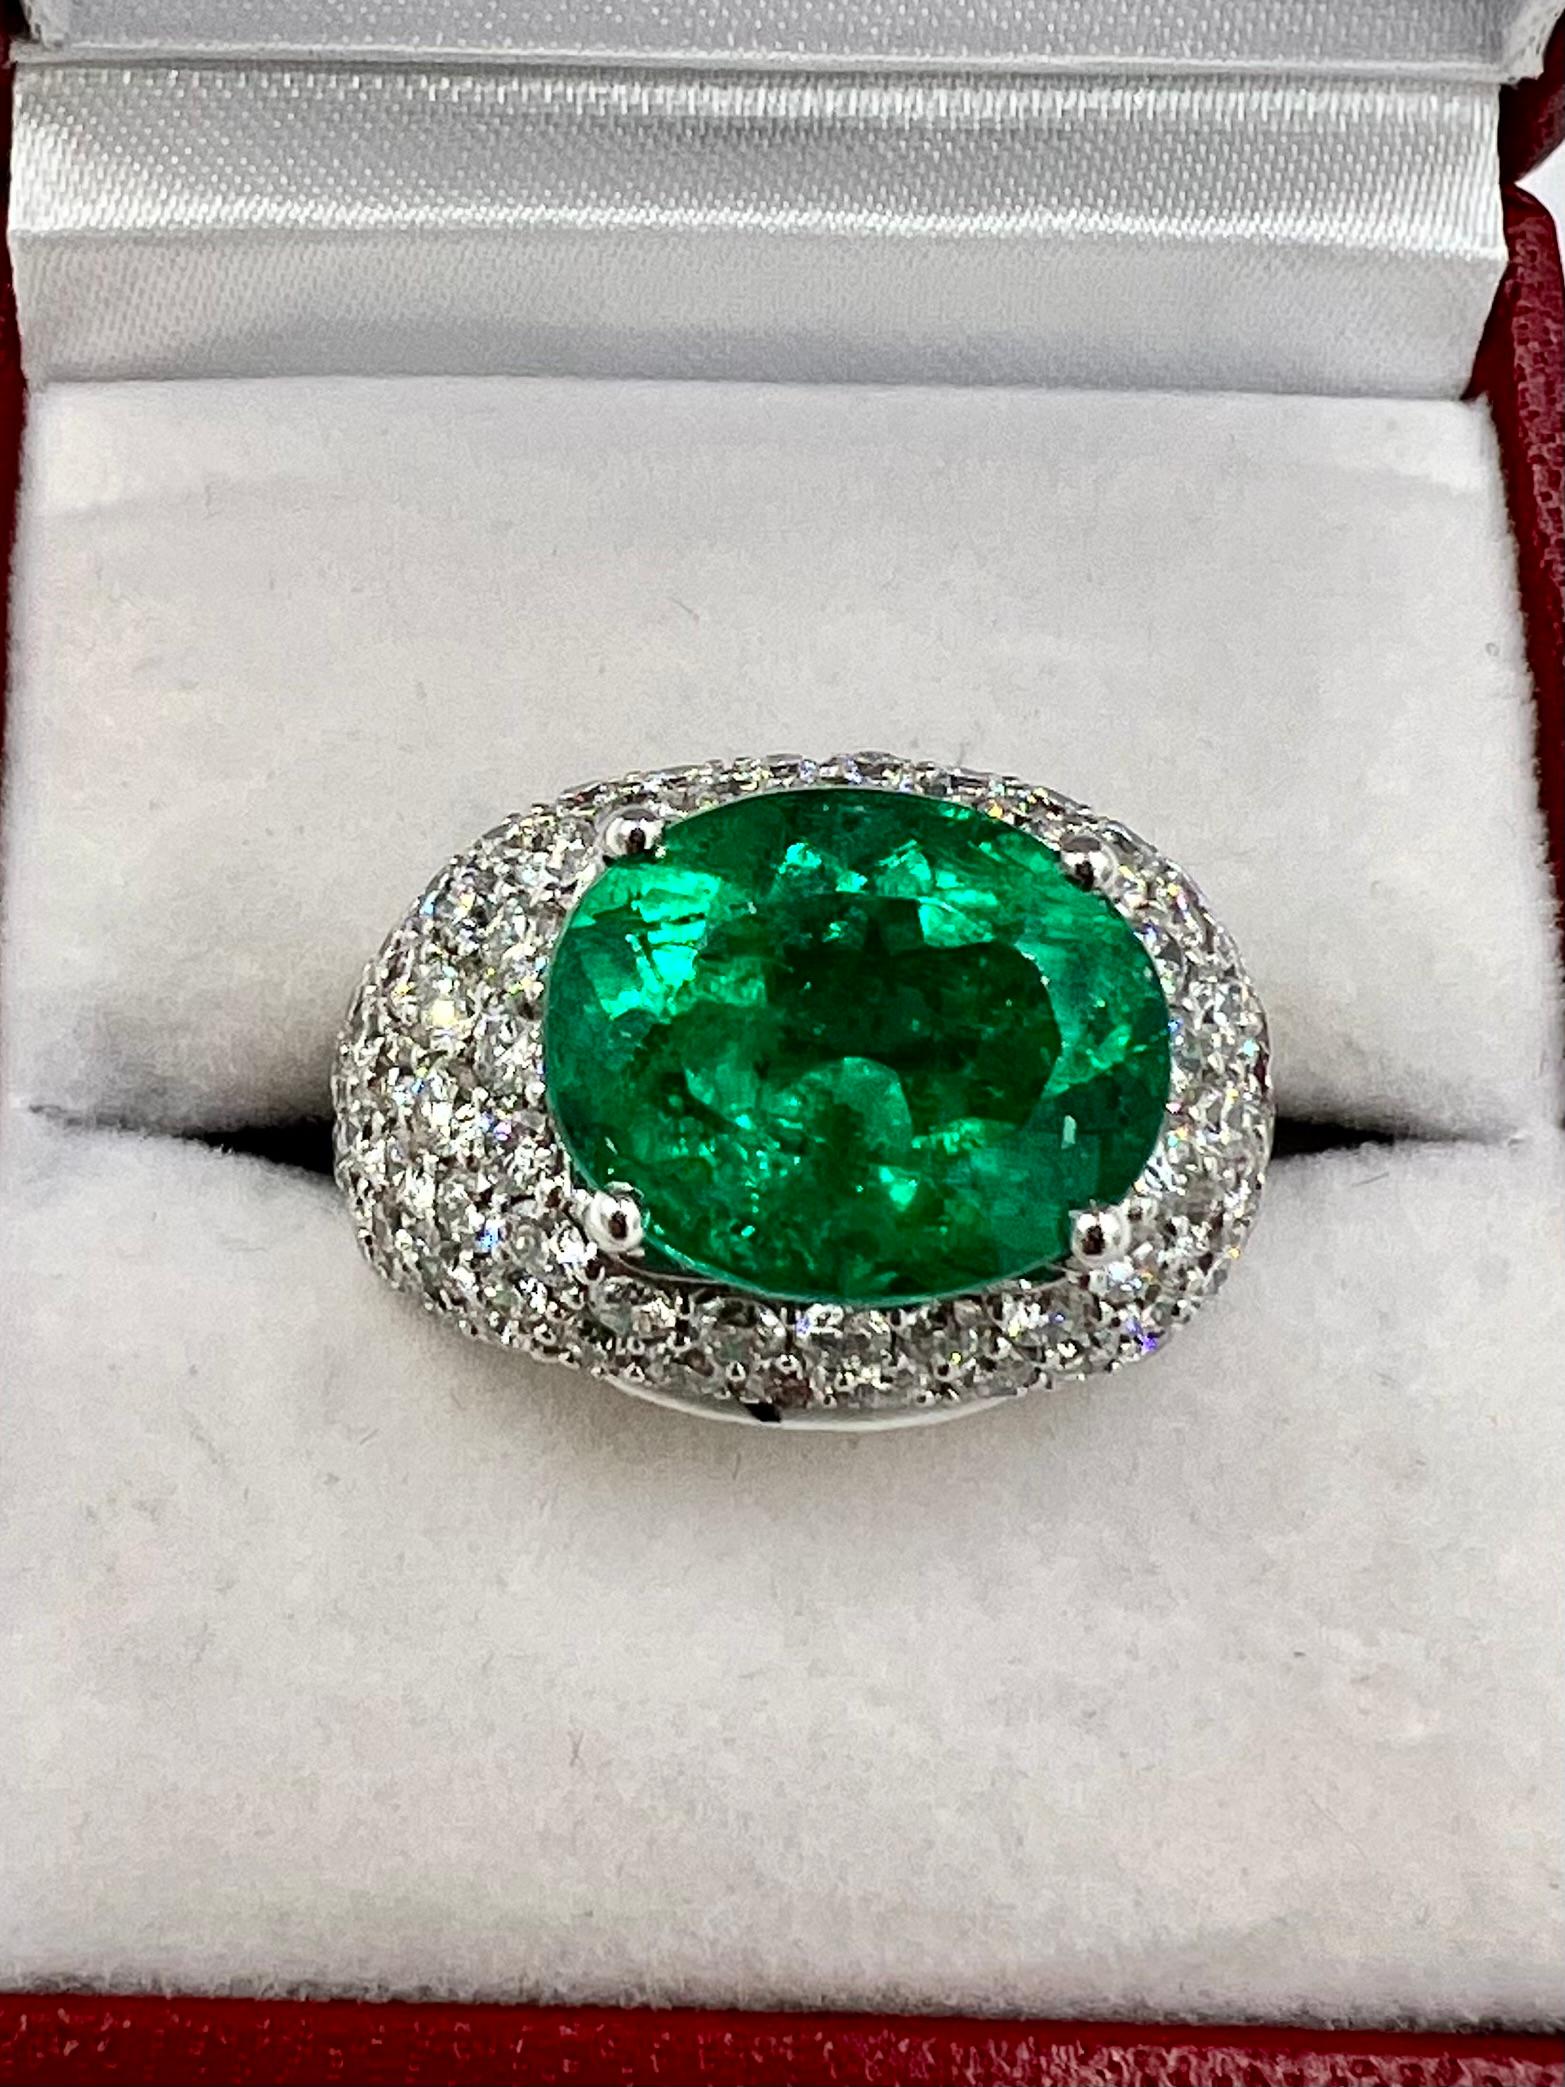 Emerald and diamond white gold dome ring, circa 1990s.

  This emerald and diamond white gold dome ring is a timeless piece of jewelry that exudes elegance and sophistication. Crafted with exquisite detail and precision, this stunning ring showcases